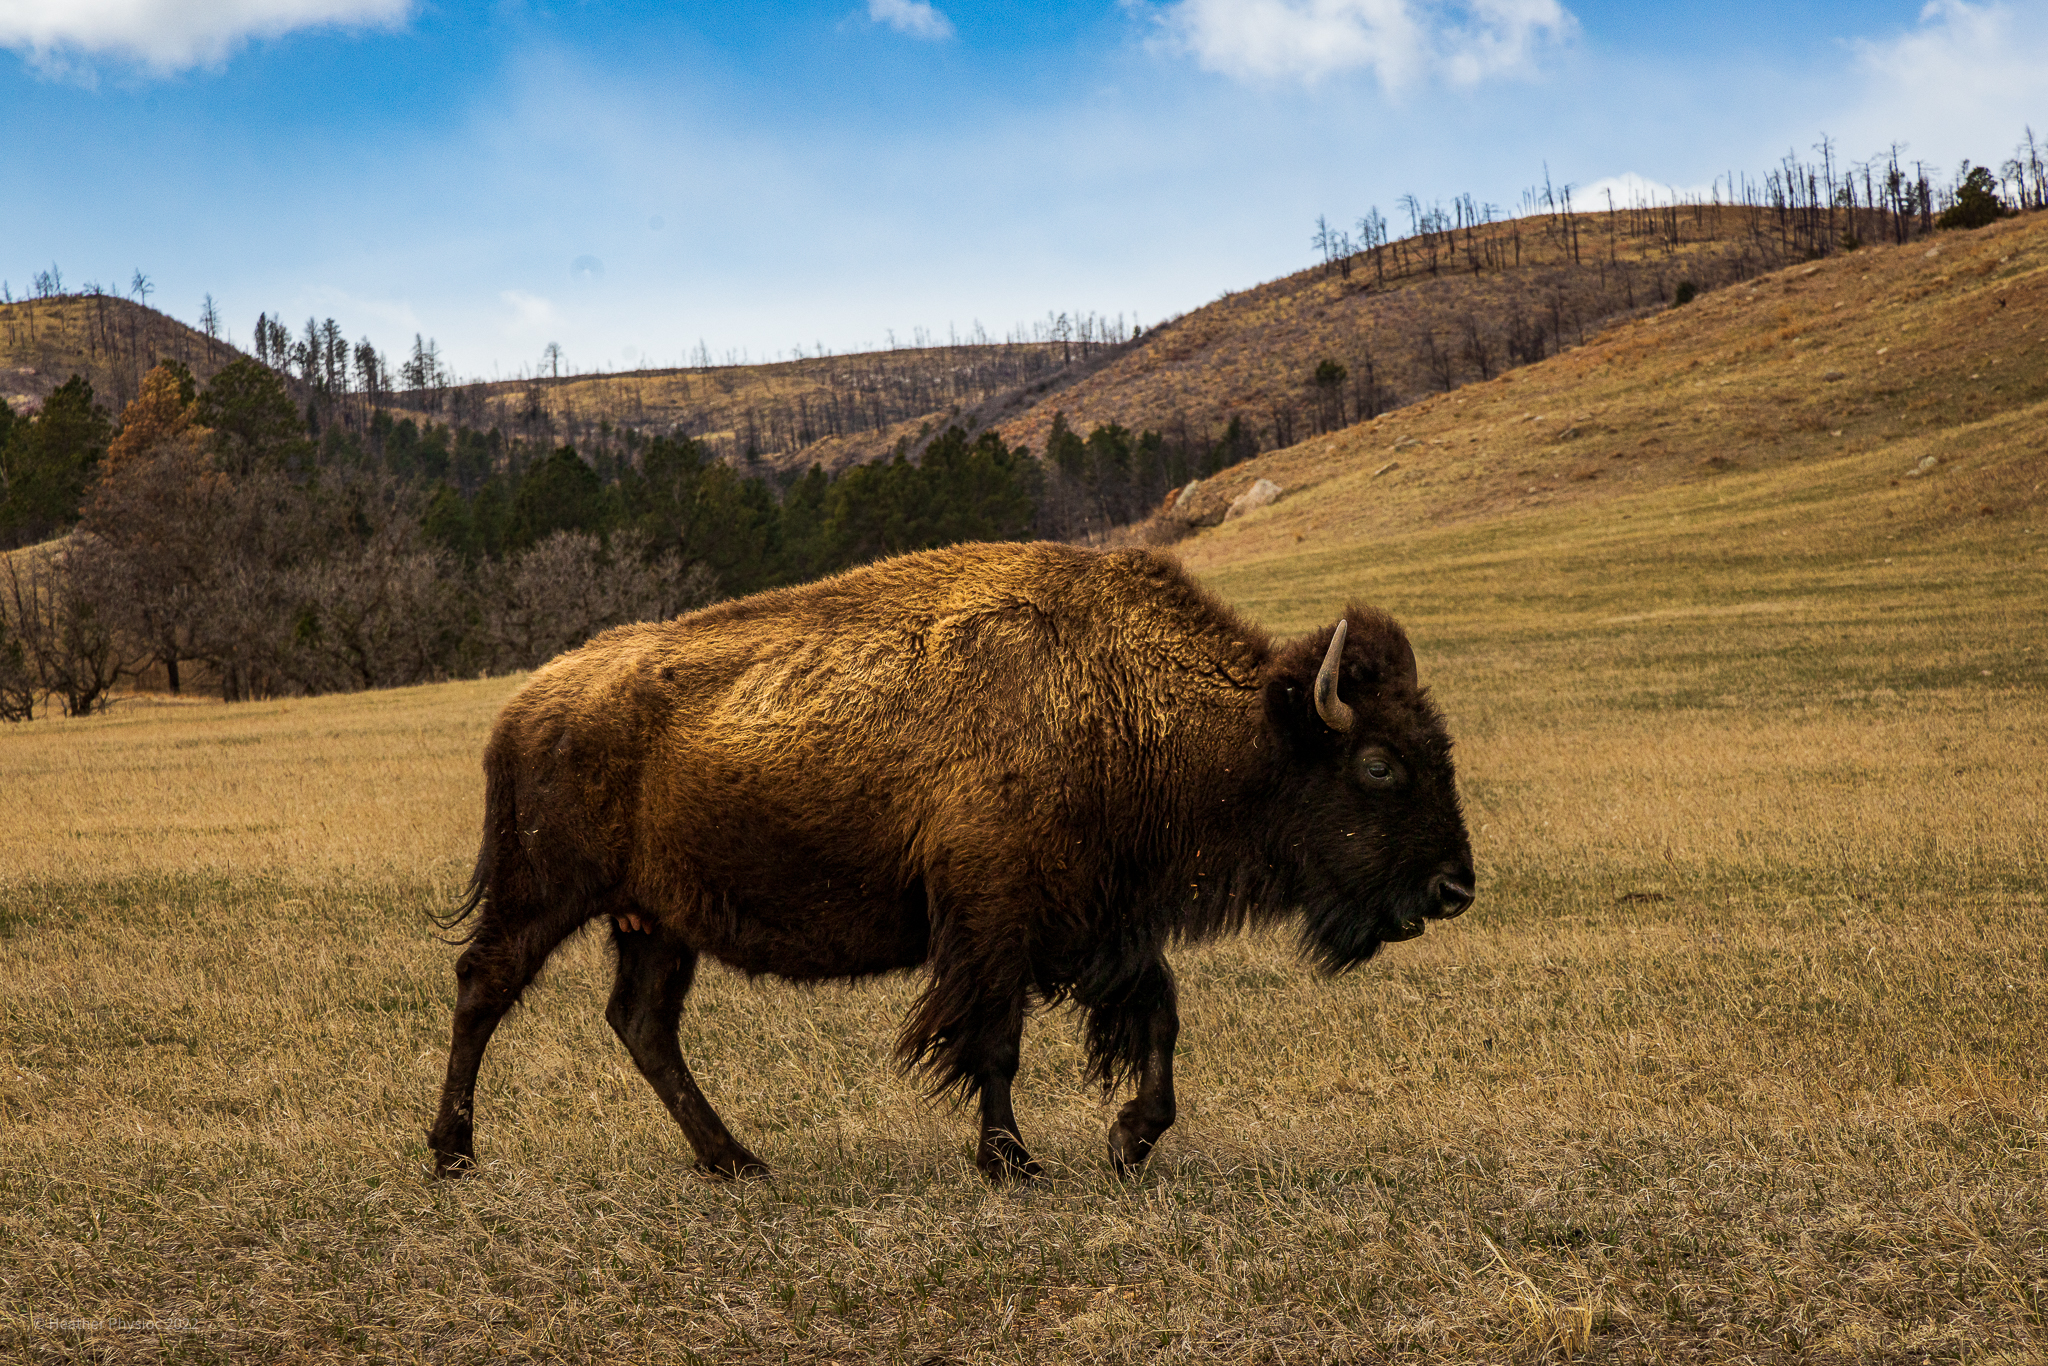 American Buffalo, United States National Mammal, at Custer State Park in Black Hills, SD